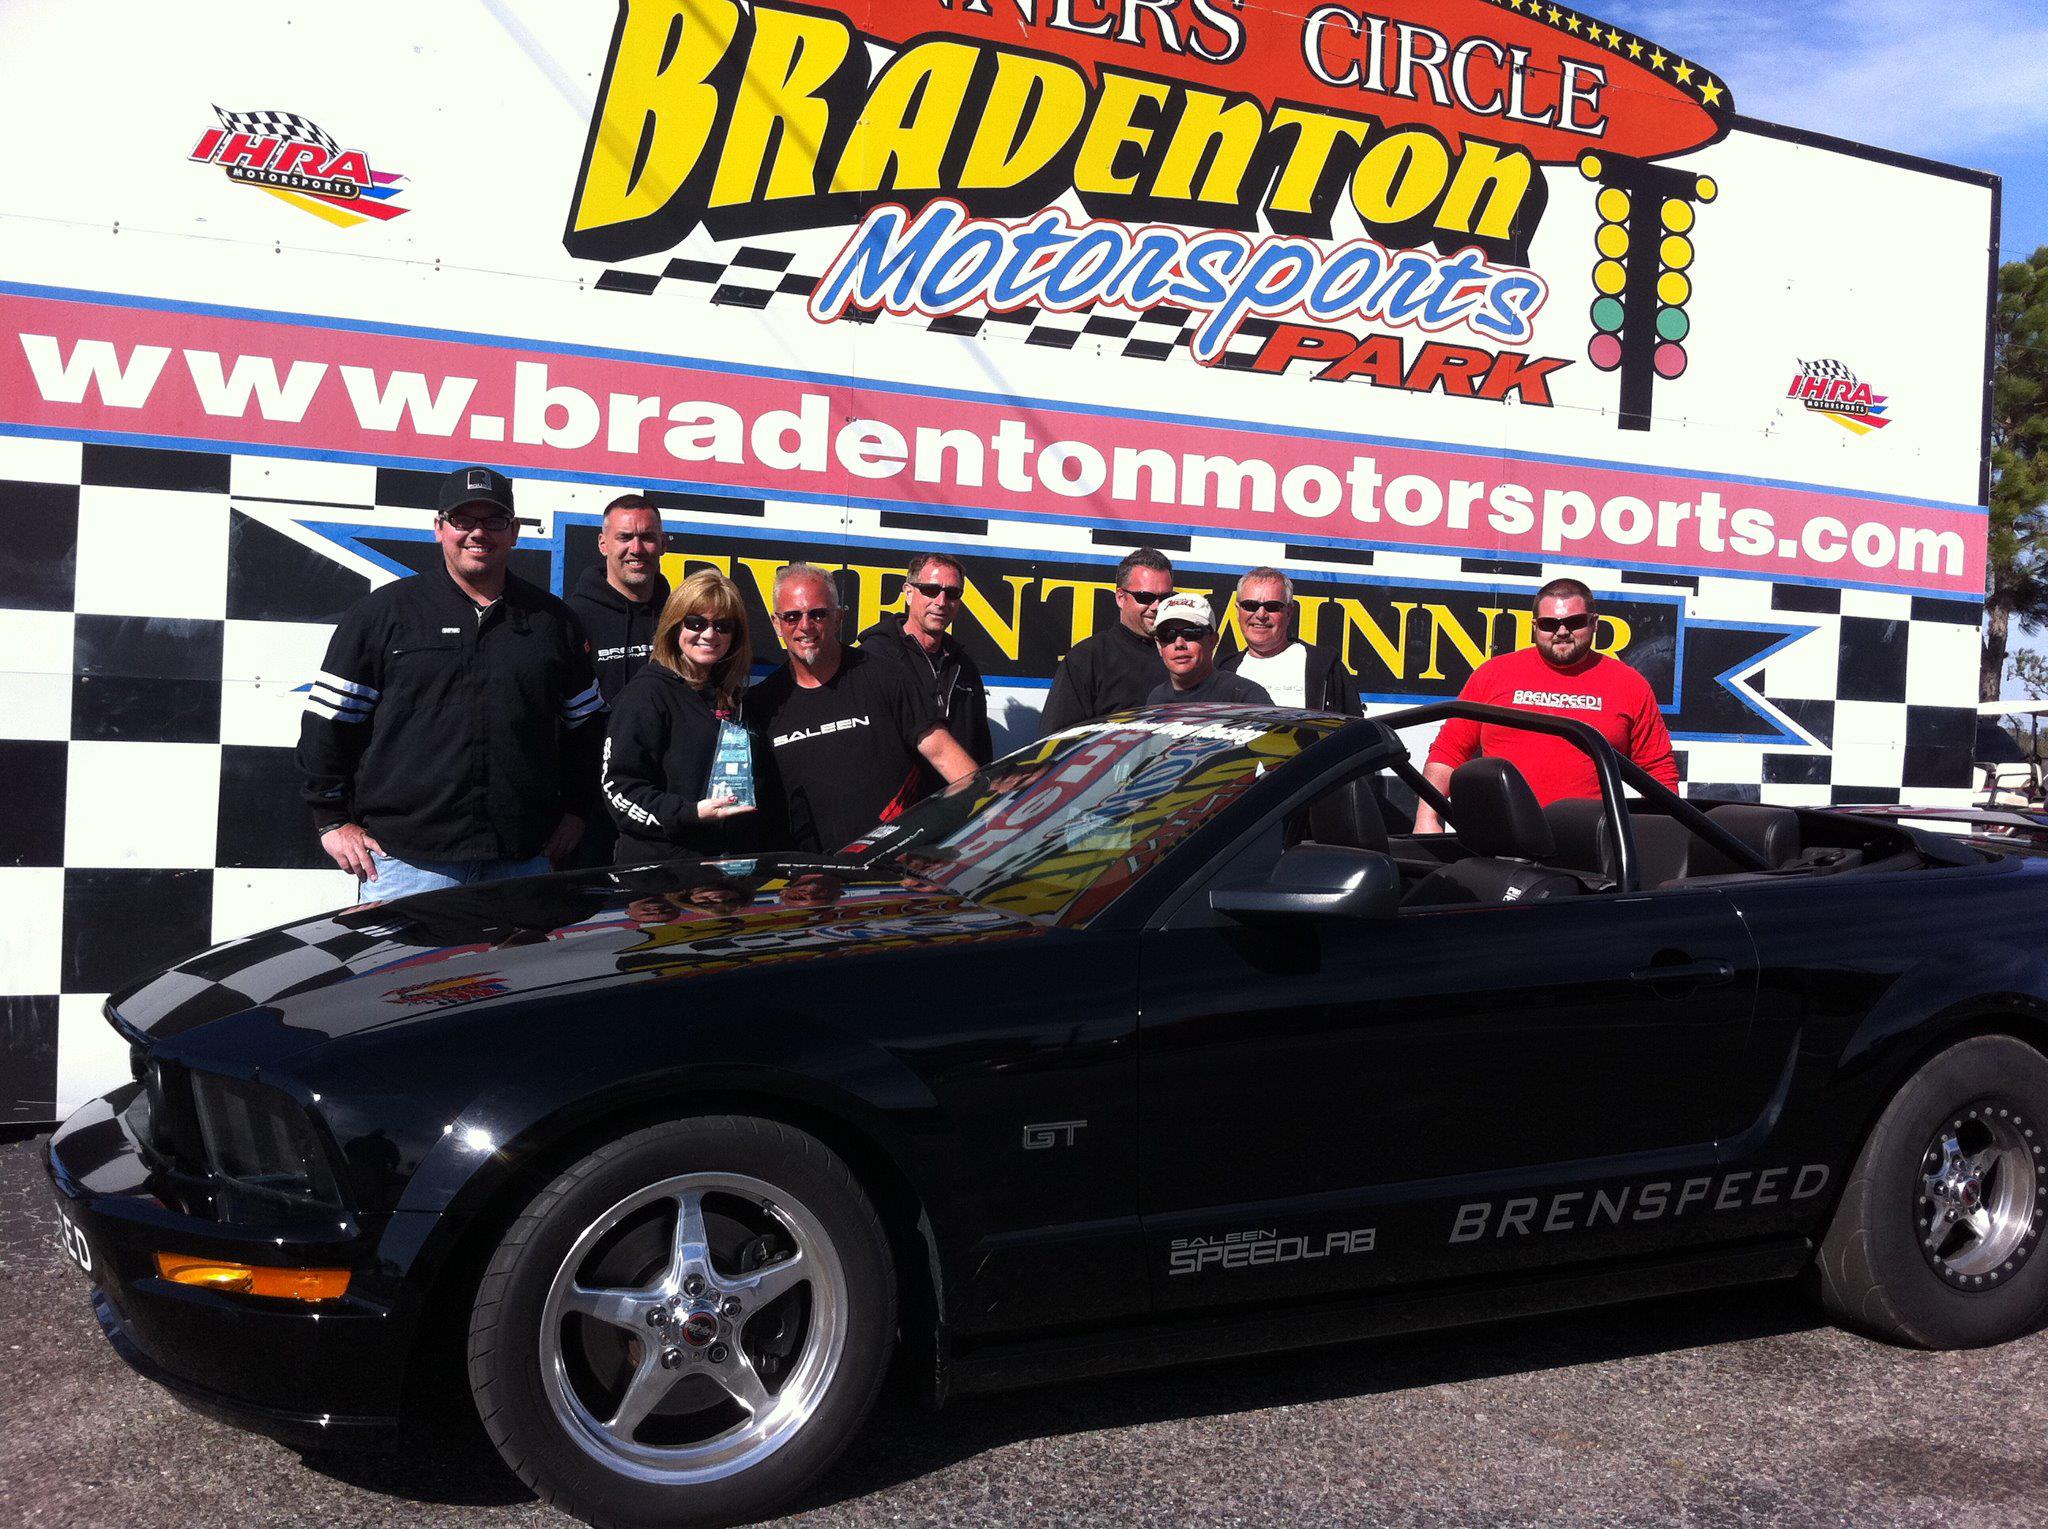 Kent Nine and the Brenspeed Team take class win at NMRA Spring Break Shootout